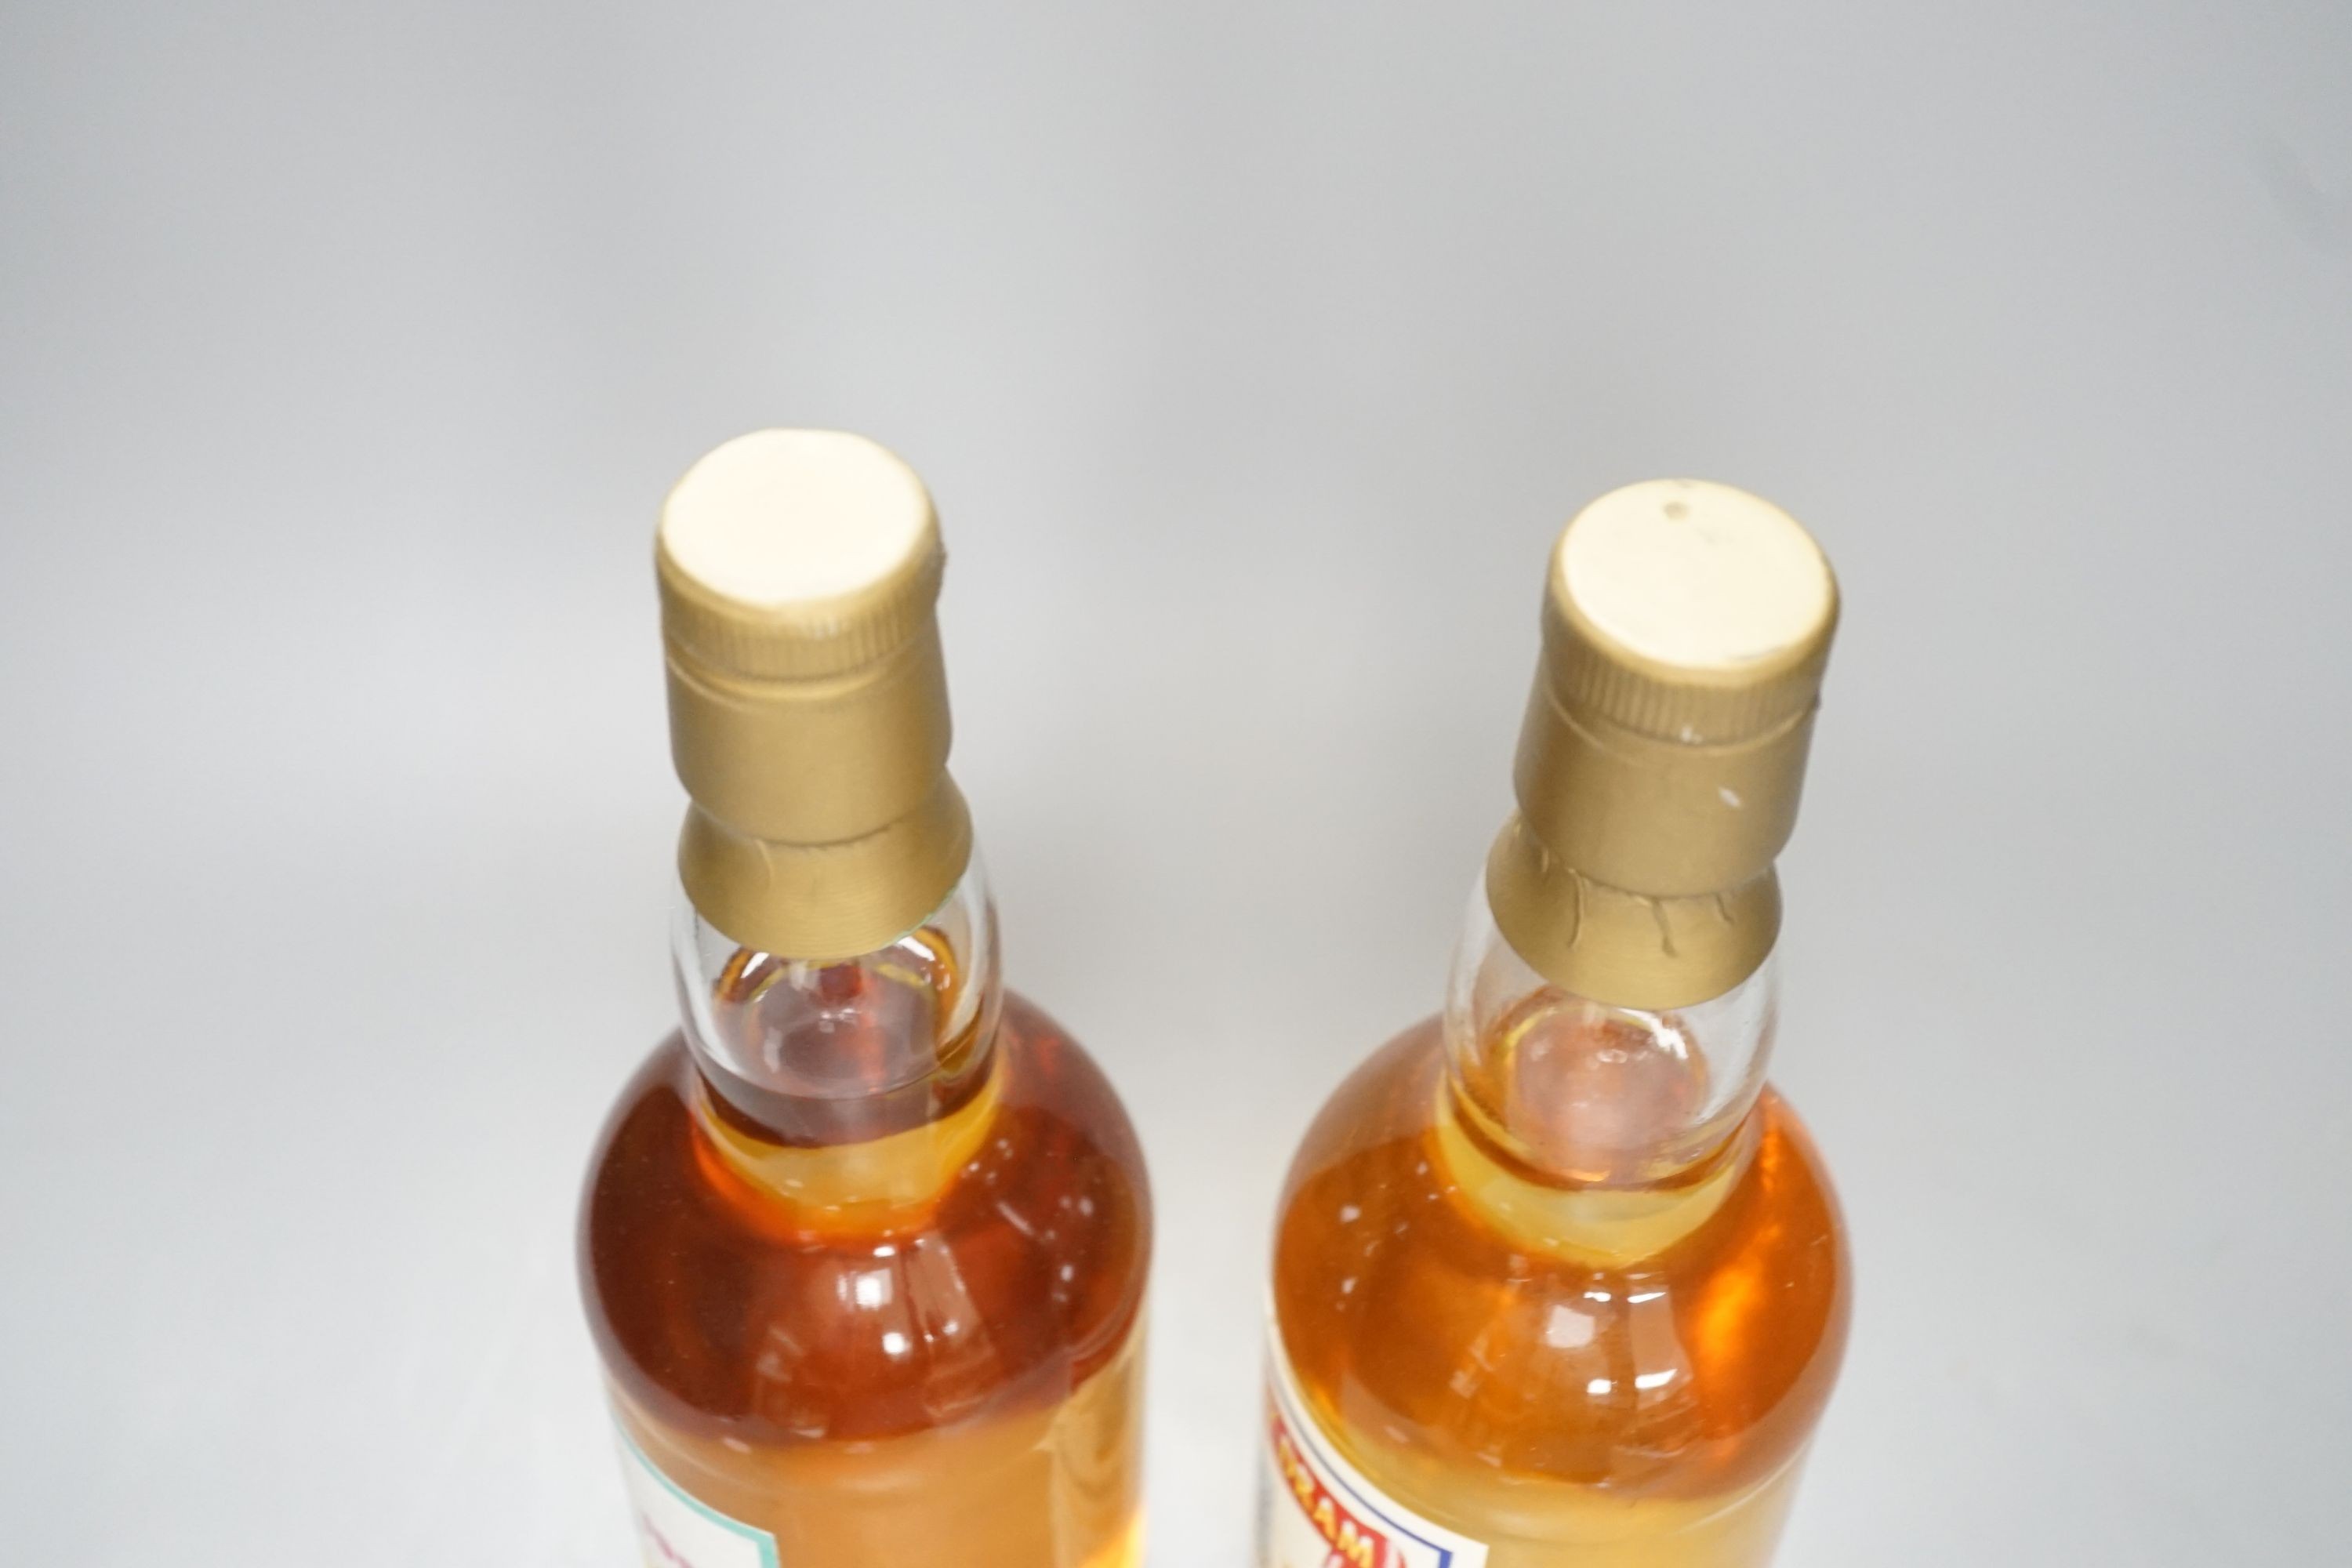 Two exclusive Master of Malt series whiskies: Hogmanay dram 1993/1994 Tomintoul 17 year old, distilled 8/10/76 bottled 12/1993 case no. 7353 bottle 29/150 and Balmenach 21 year old, bottle no. 34/60 'not to be opened unt